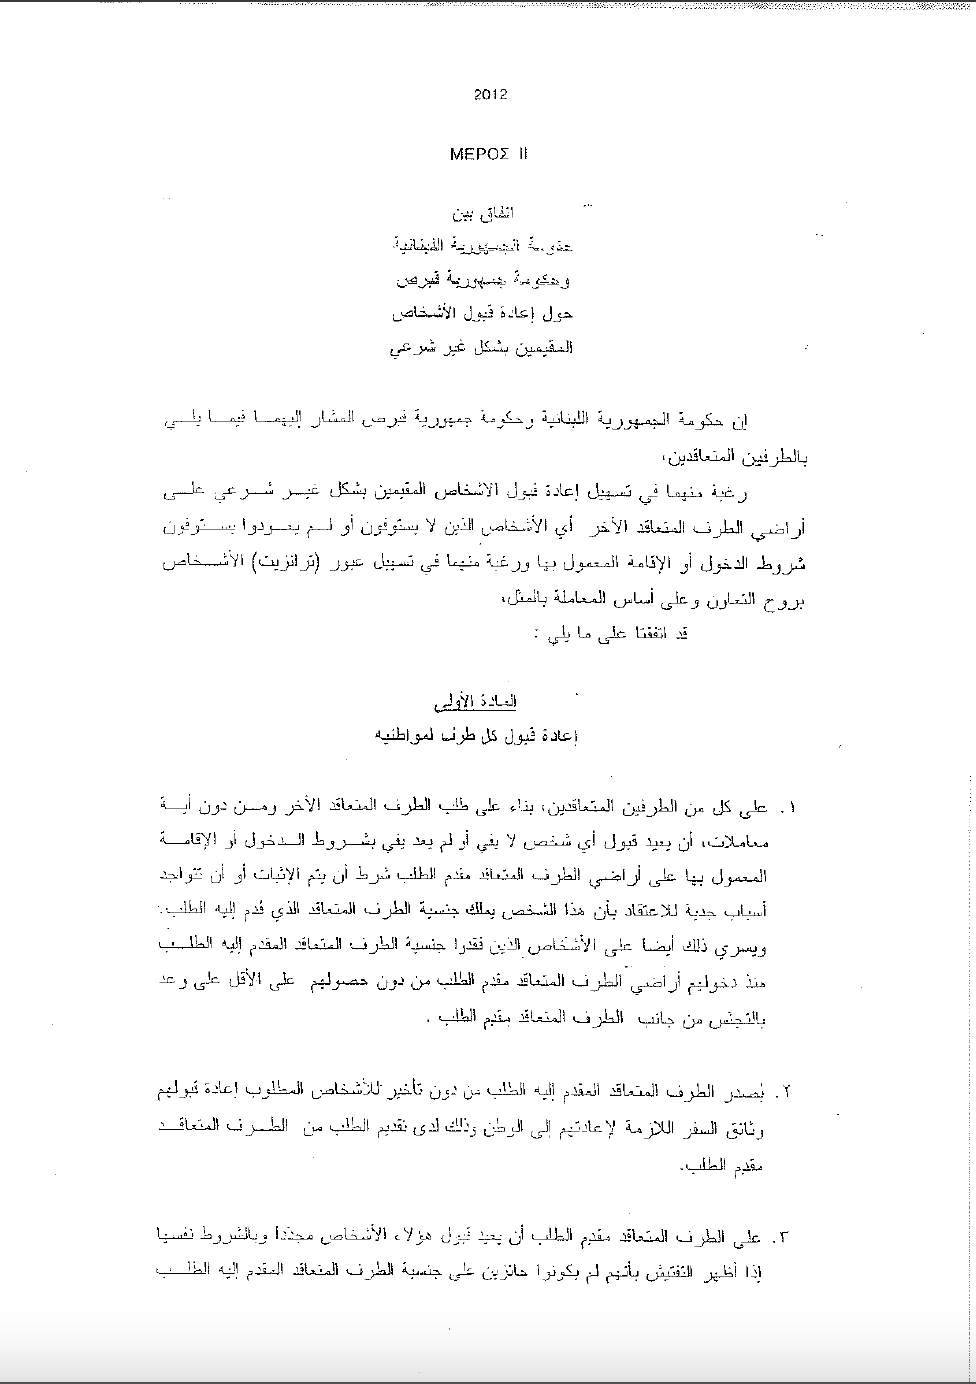 A page of the Lebanon-Cyprus migration control agreement